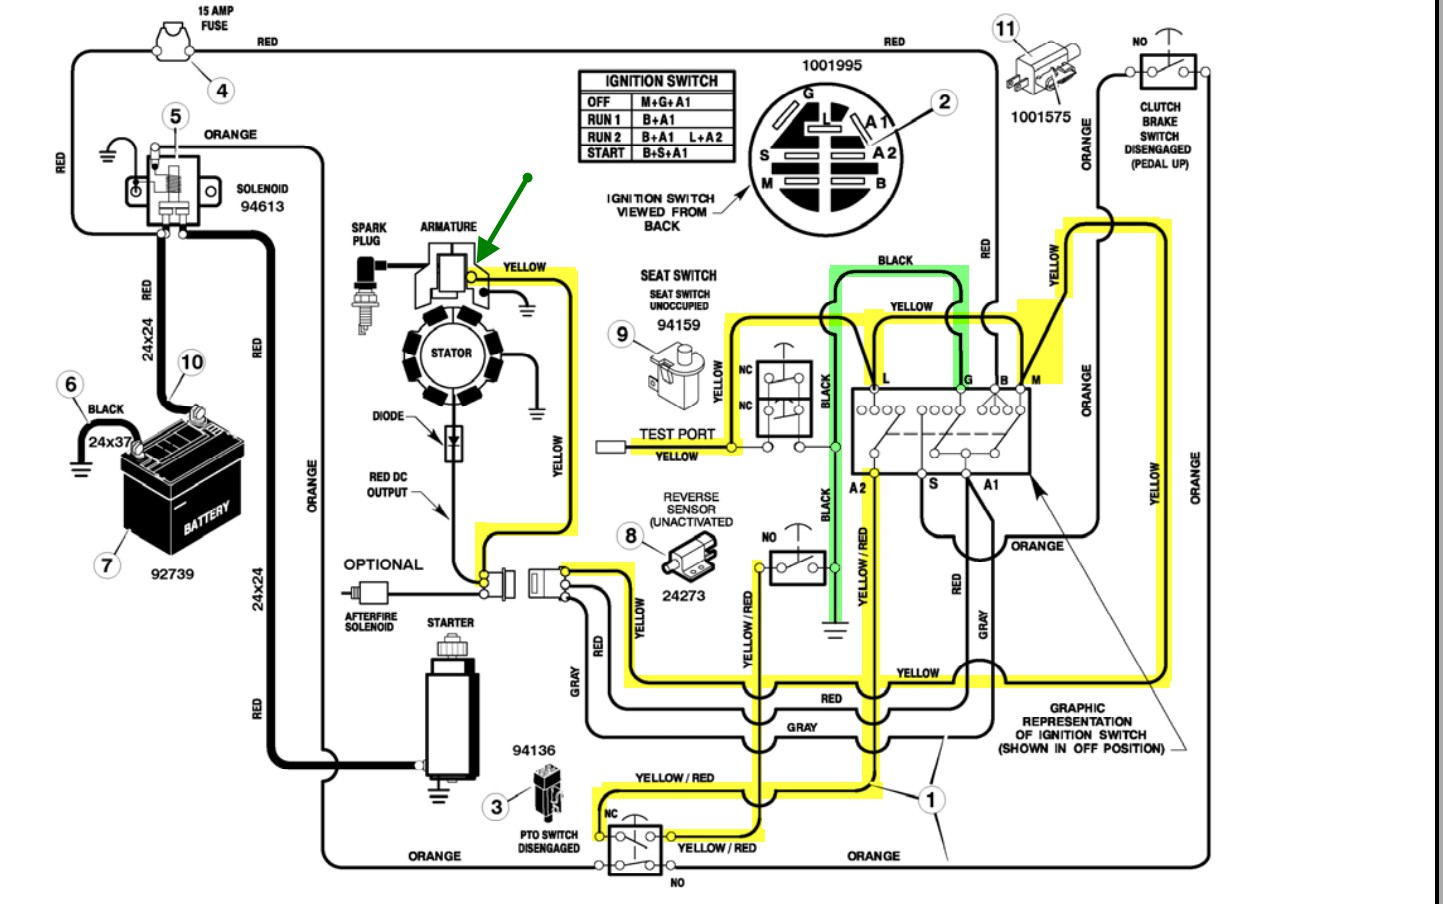 Briggs And Stratton Ignition Coil Wiring Diagram | Wiring Diagram - Briggs And Stratton Coil Wiring Diagram